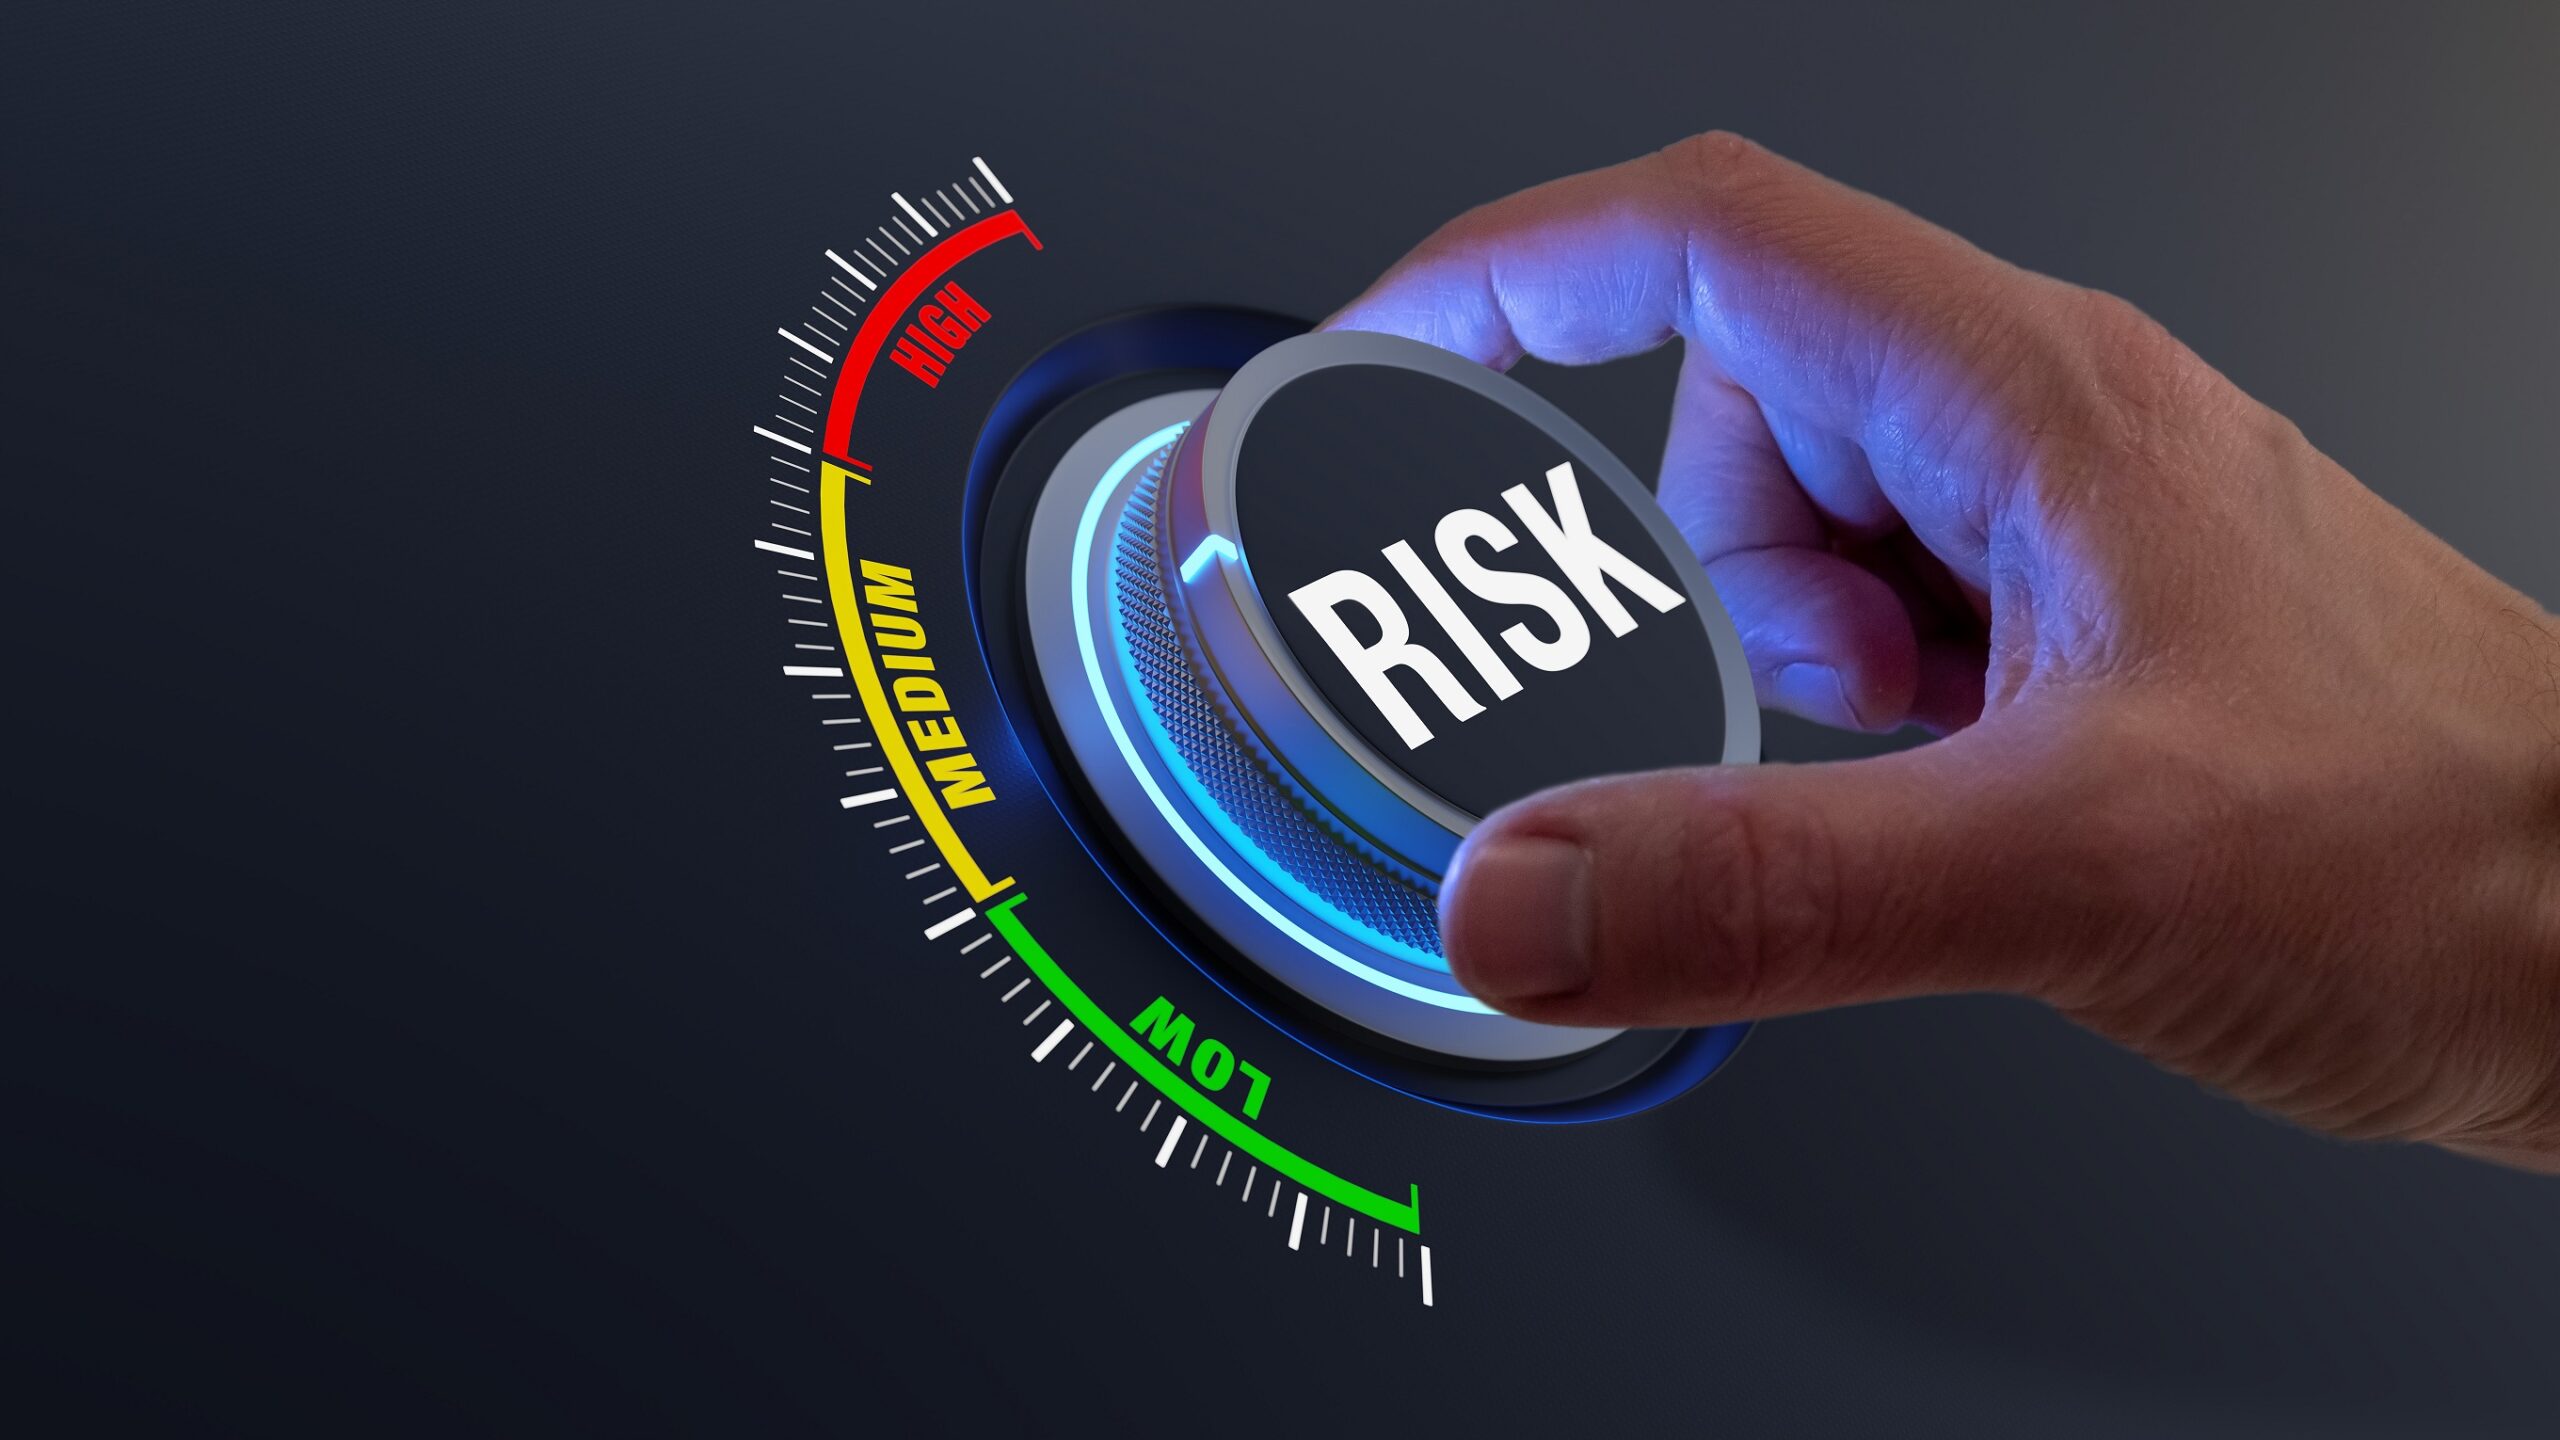 Signium research: How Should Leaders Manage Risk in Turbulent Times?